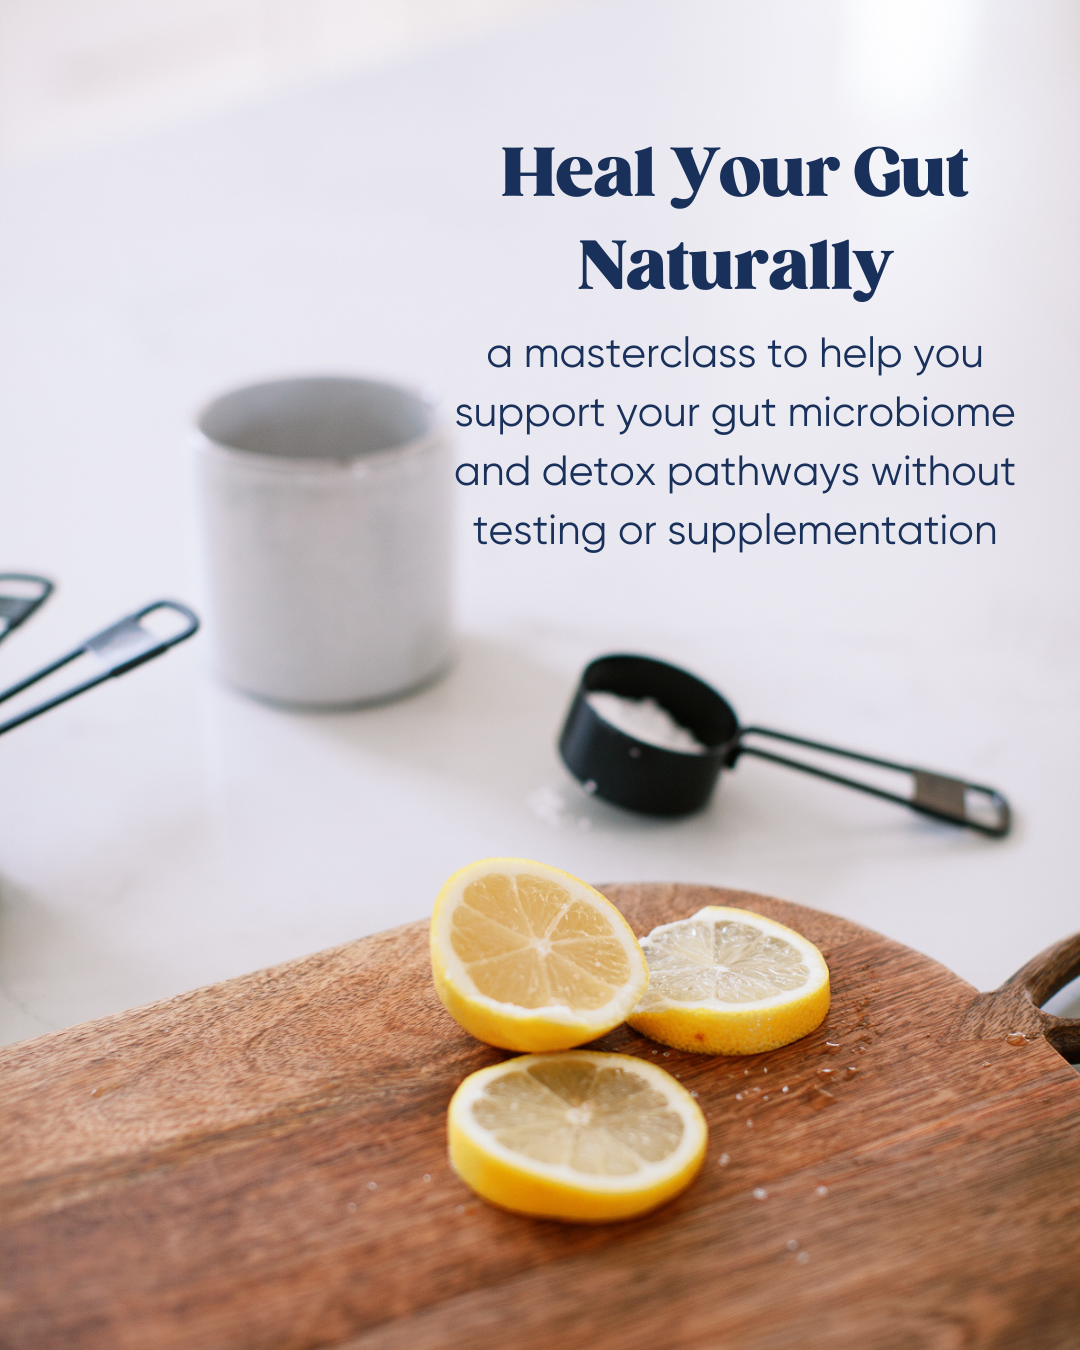 Heal Your Gut Naturally